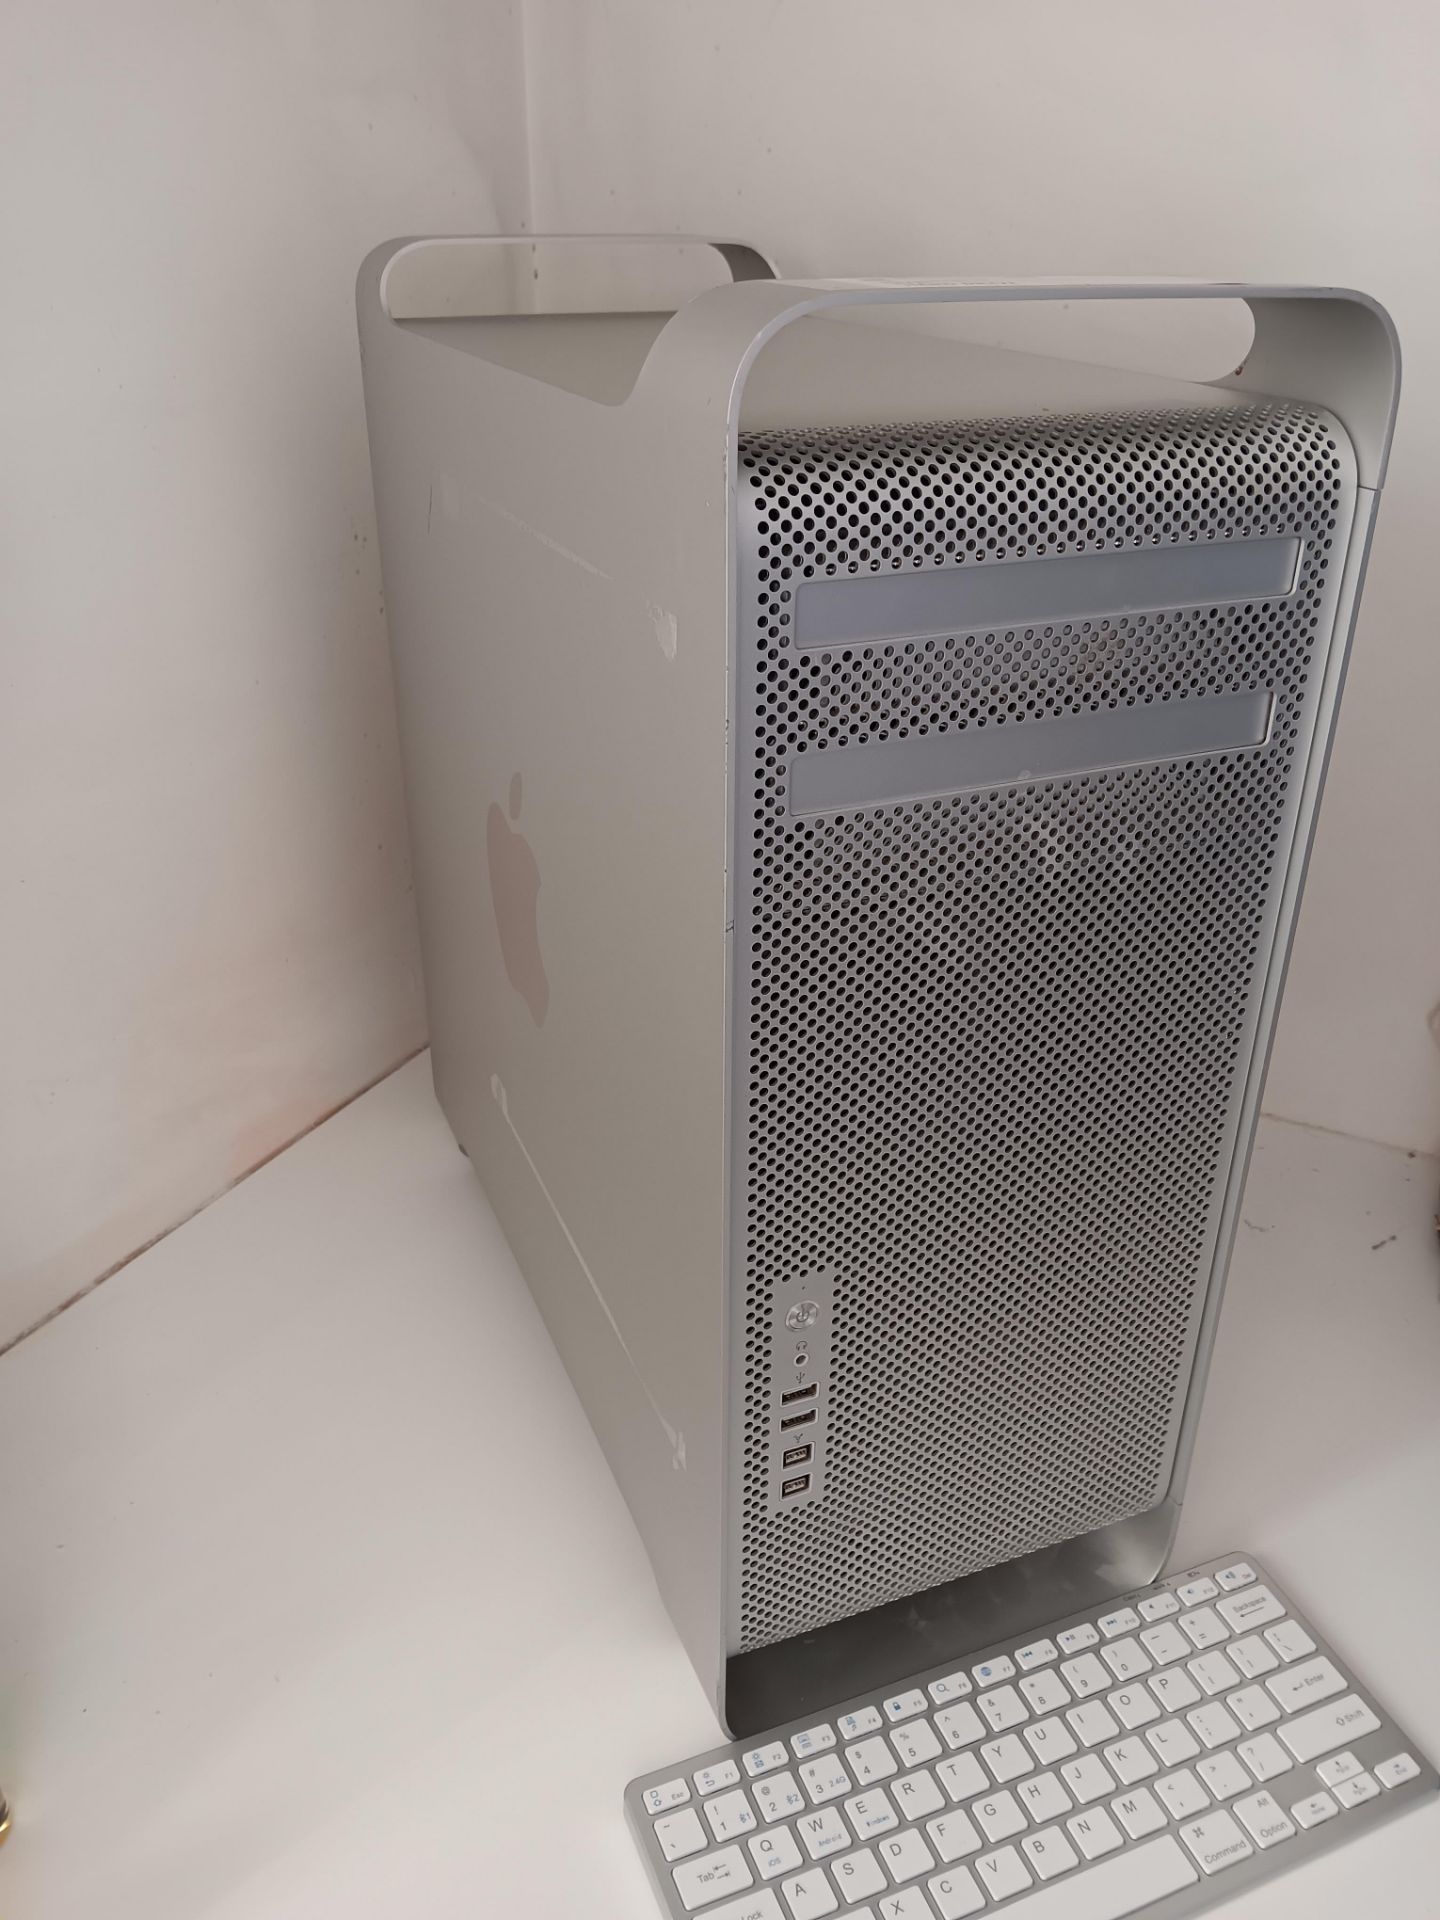 Apple Mac Pro Xeon Computer – 2.2GHZ Processor & 16GB Ram (No Hard Drive or Charger) - Image 2 of 2